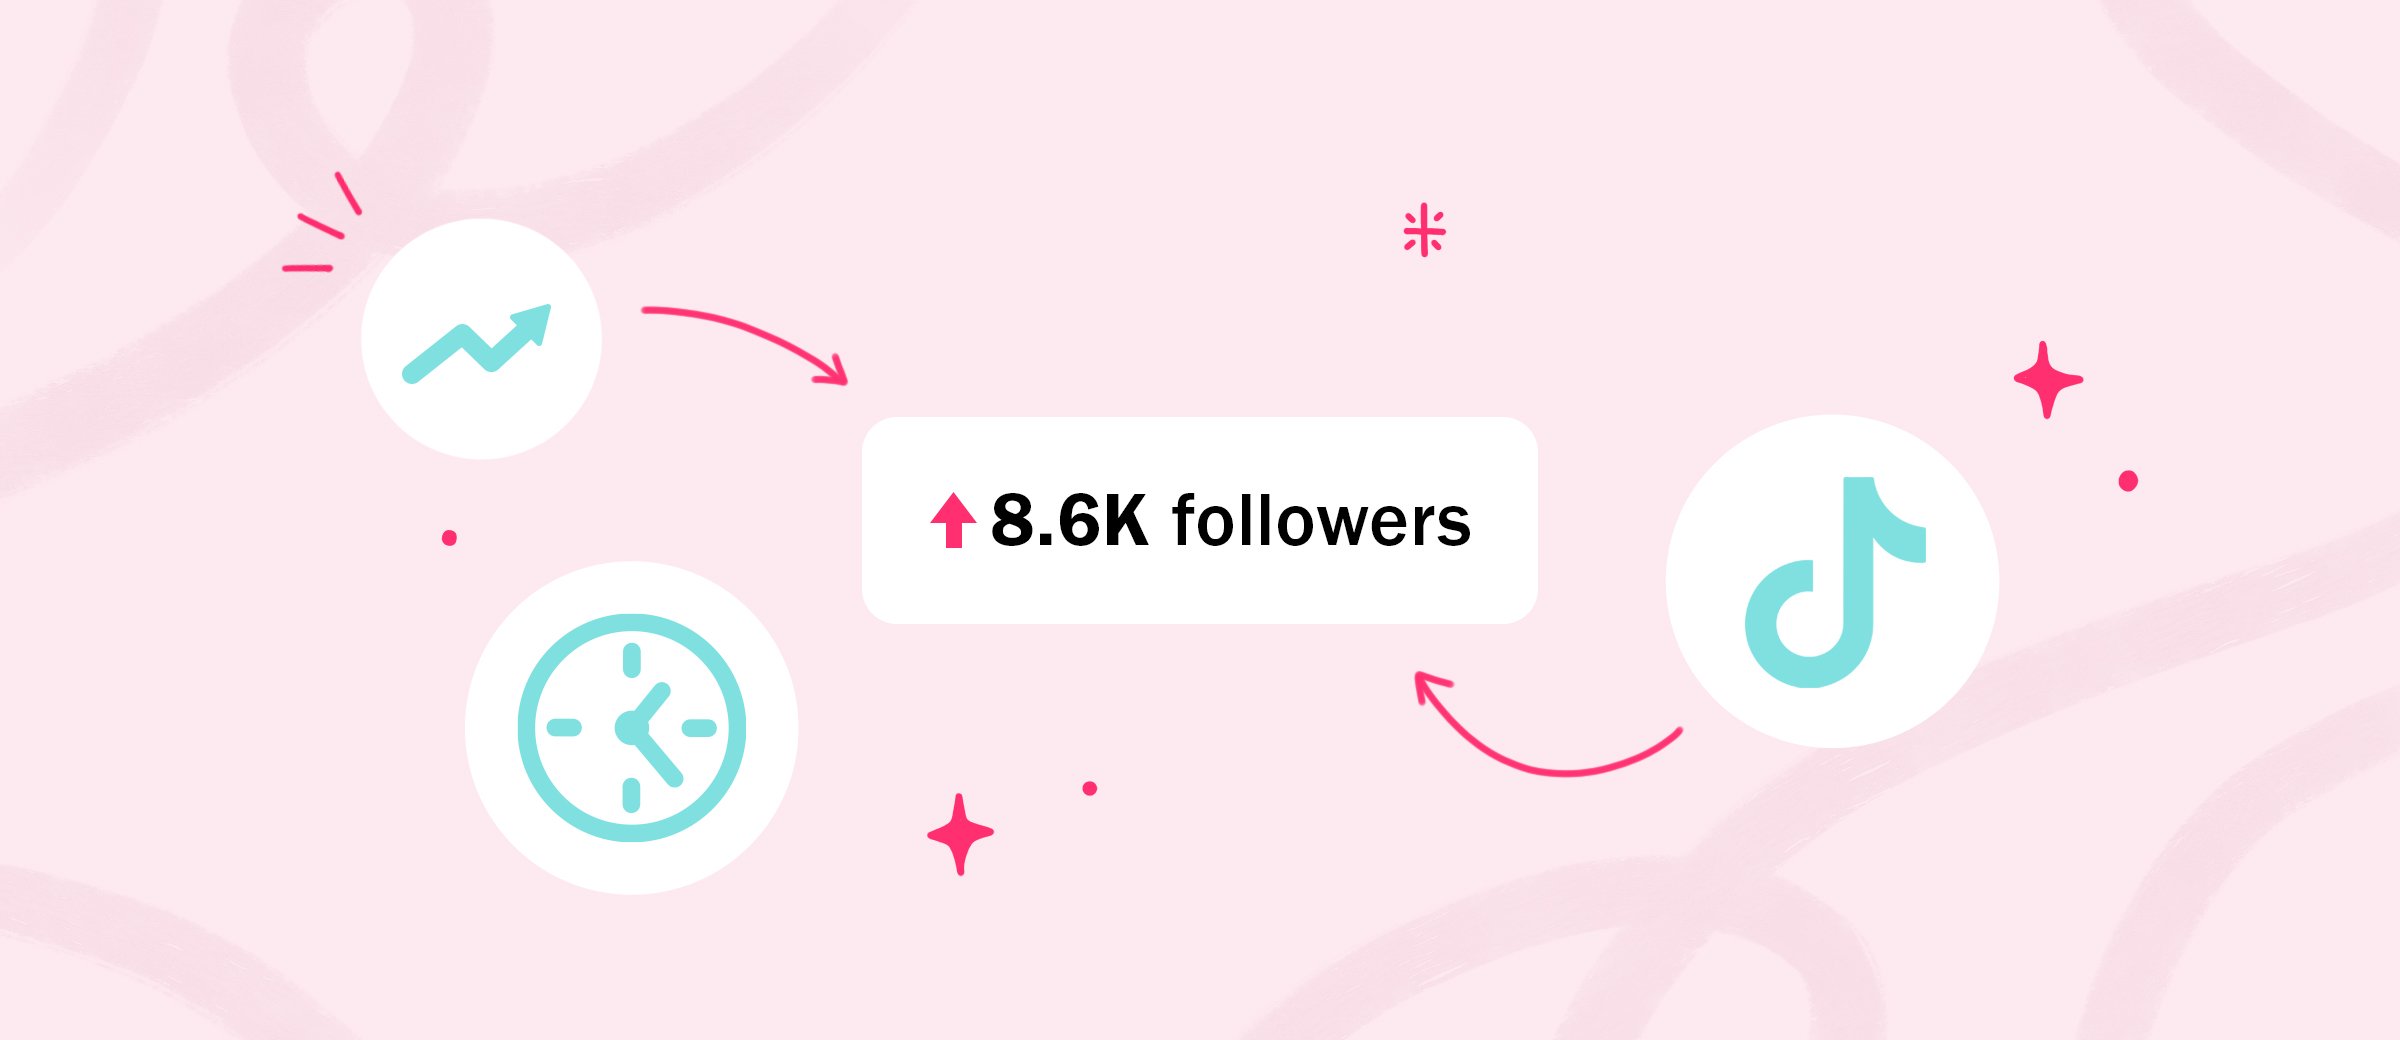 Read about How to Get More Followers on TikTok, on PLANOLY